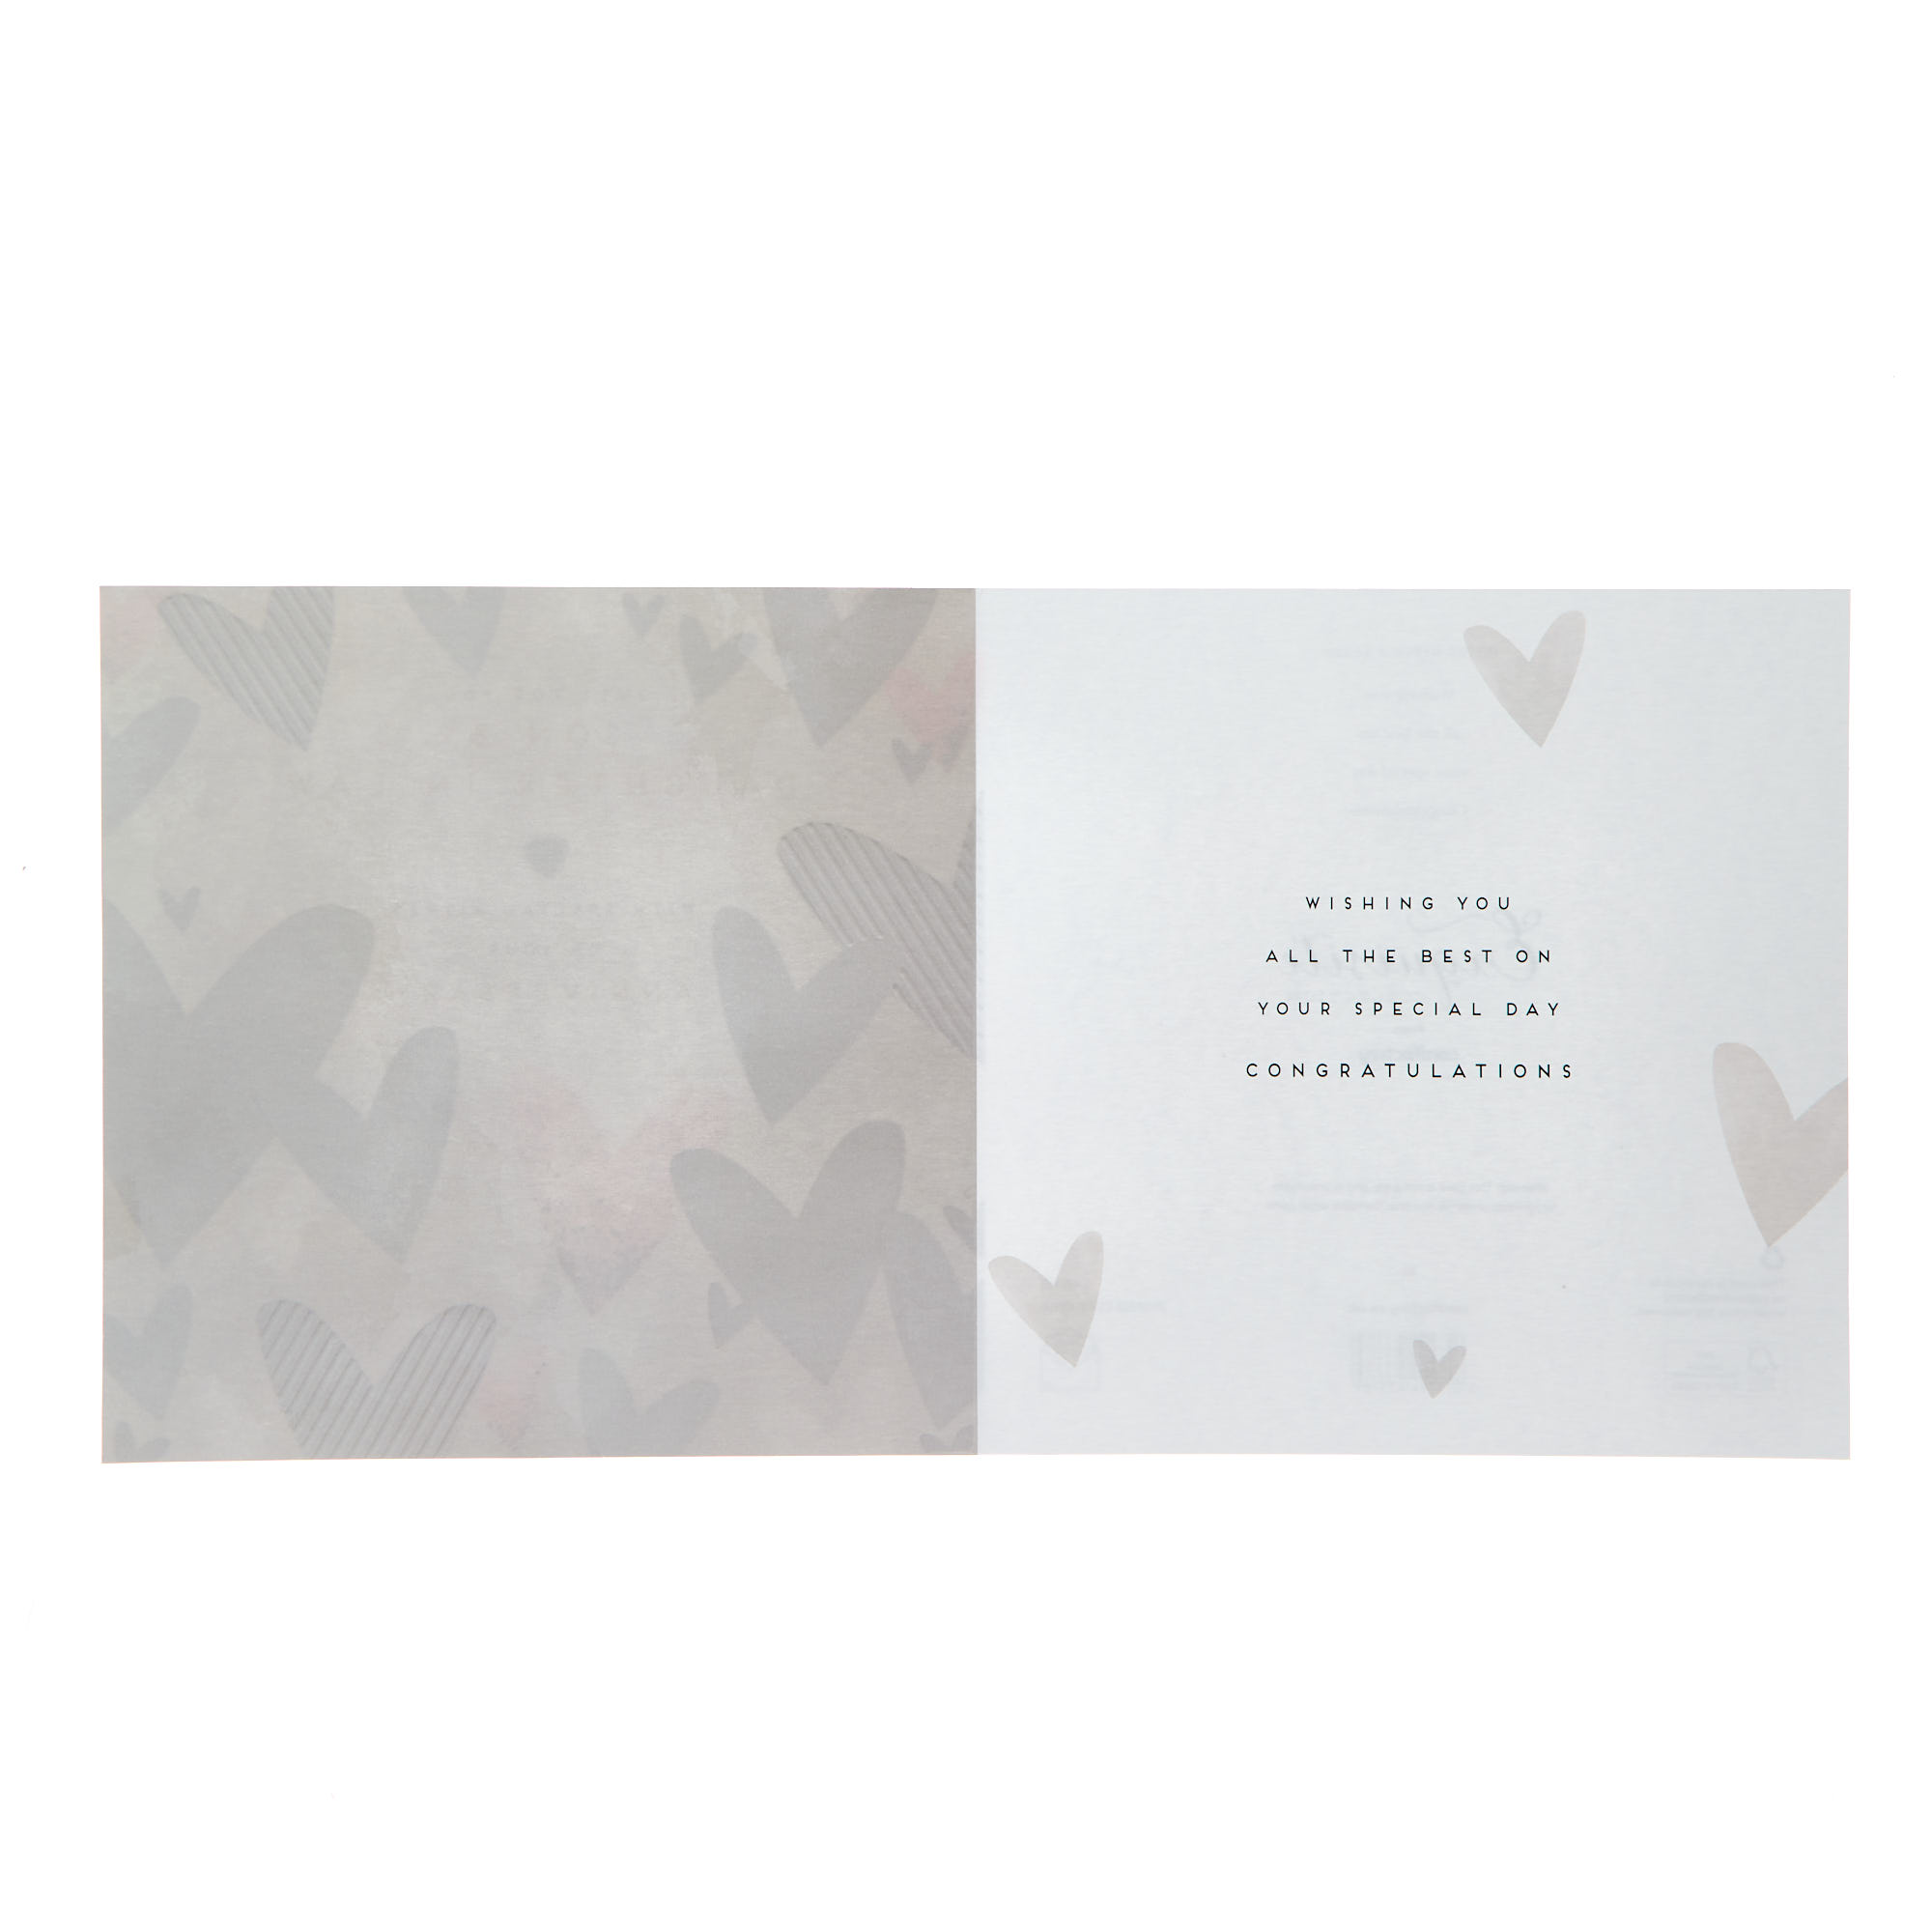 Son & Daughter In Law Foil Hearts Wedding Anniversary Card